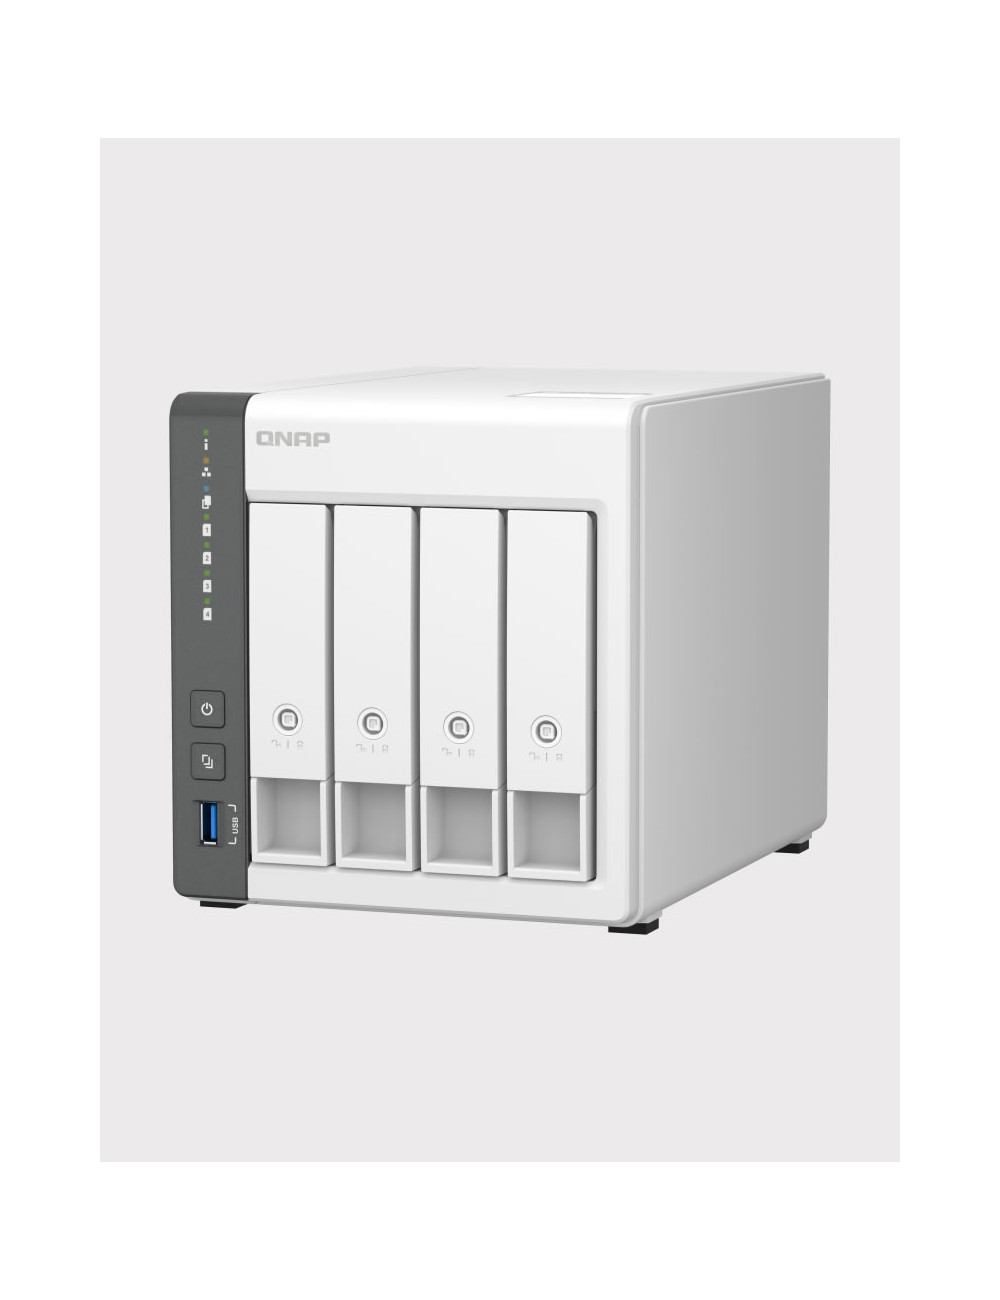 Synology DX517 Unité d'extension IRONWOLF PRO 70To (5x14To)